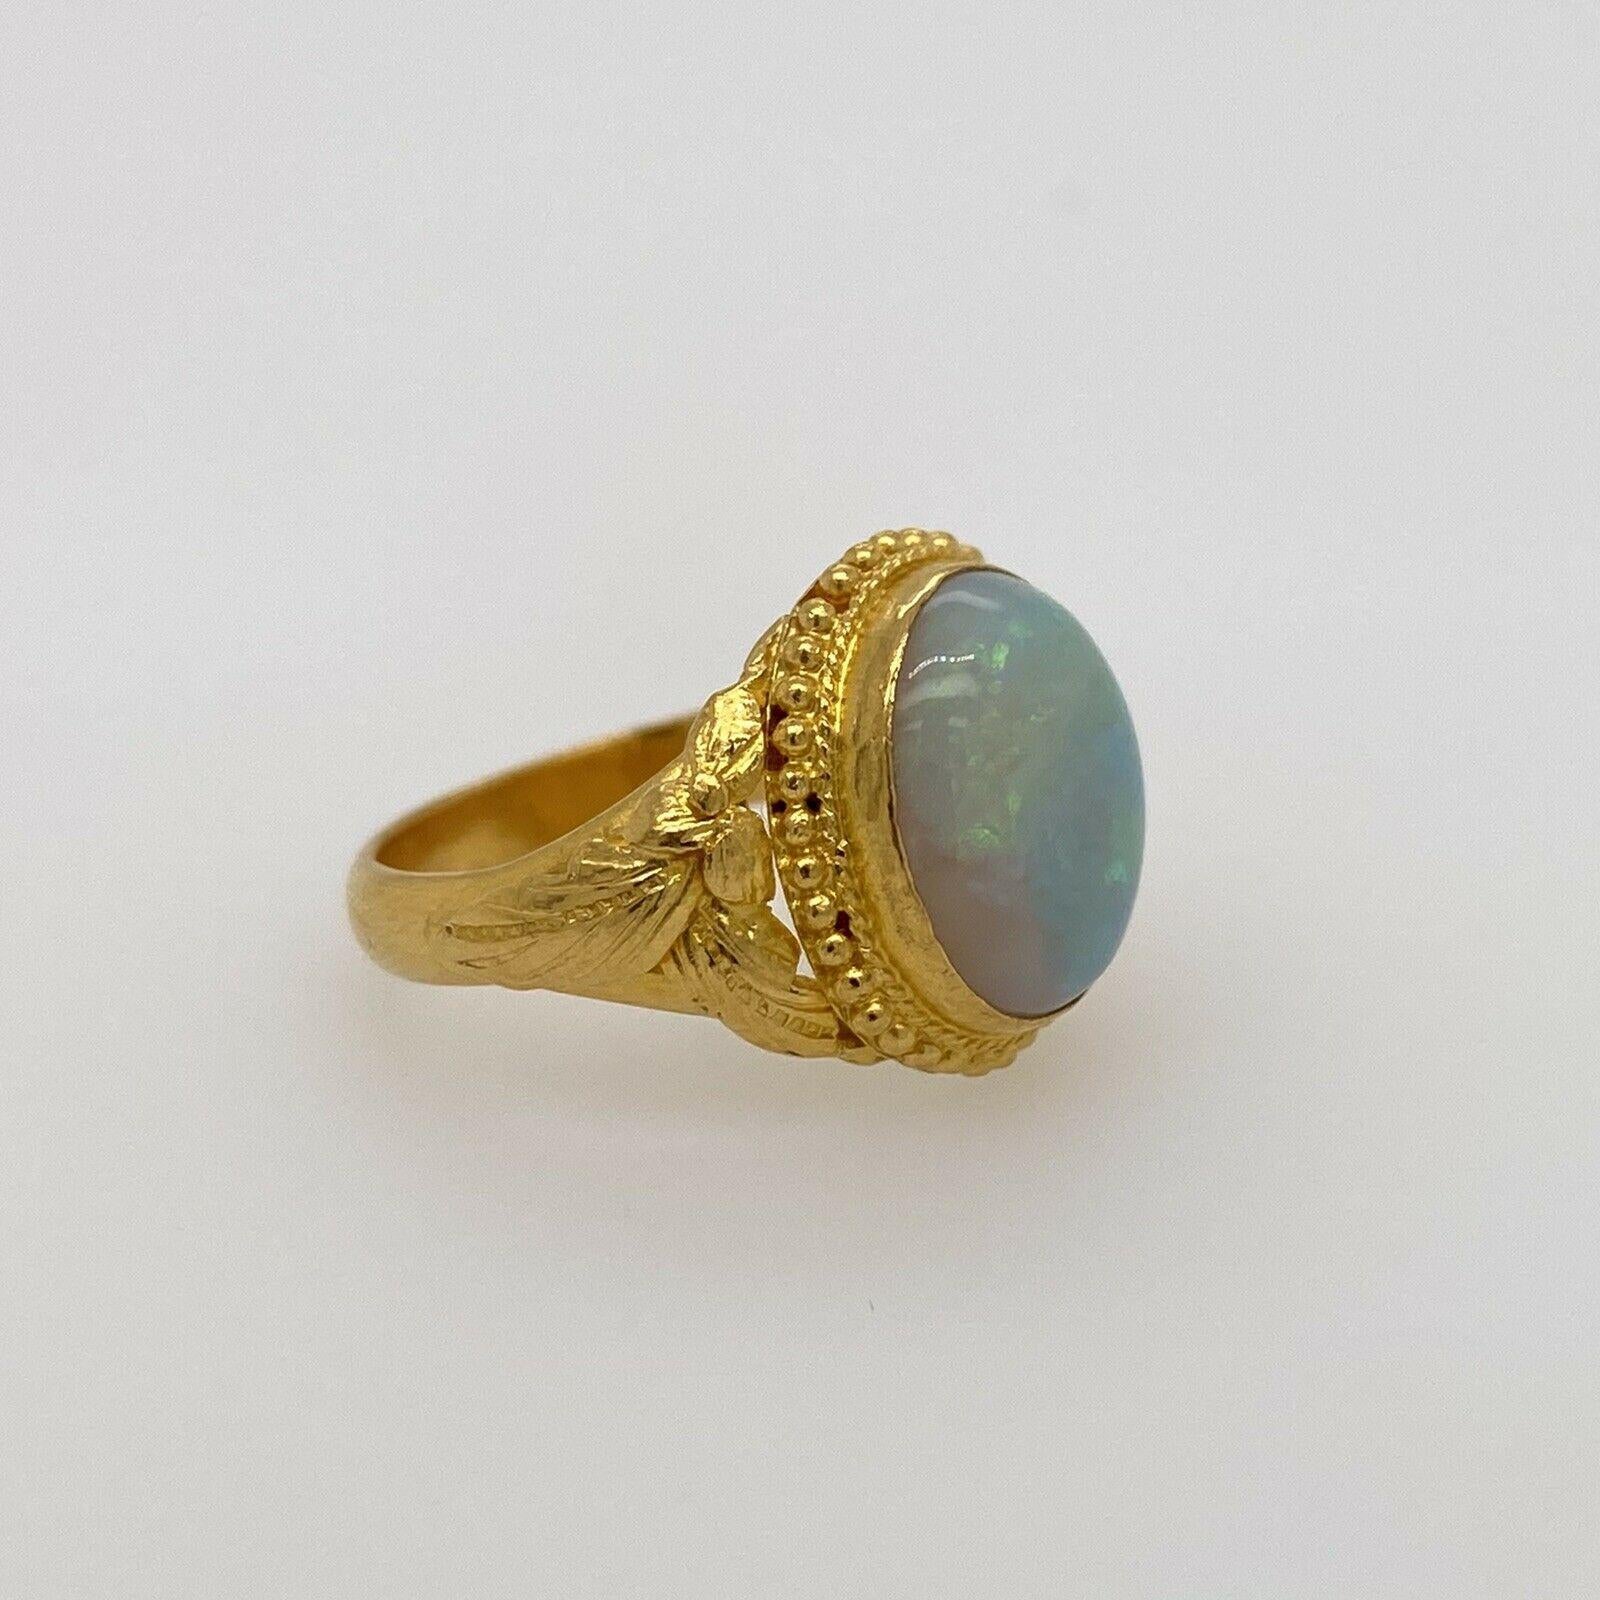 Vintage Solid 24 Karat Yellow Gold and Opal Ring 5.9g 4